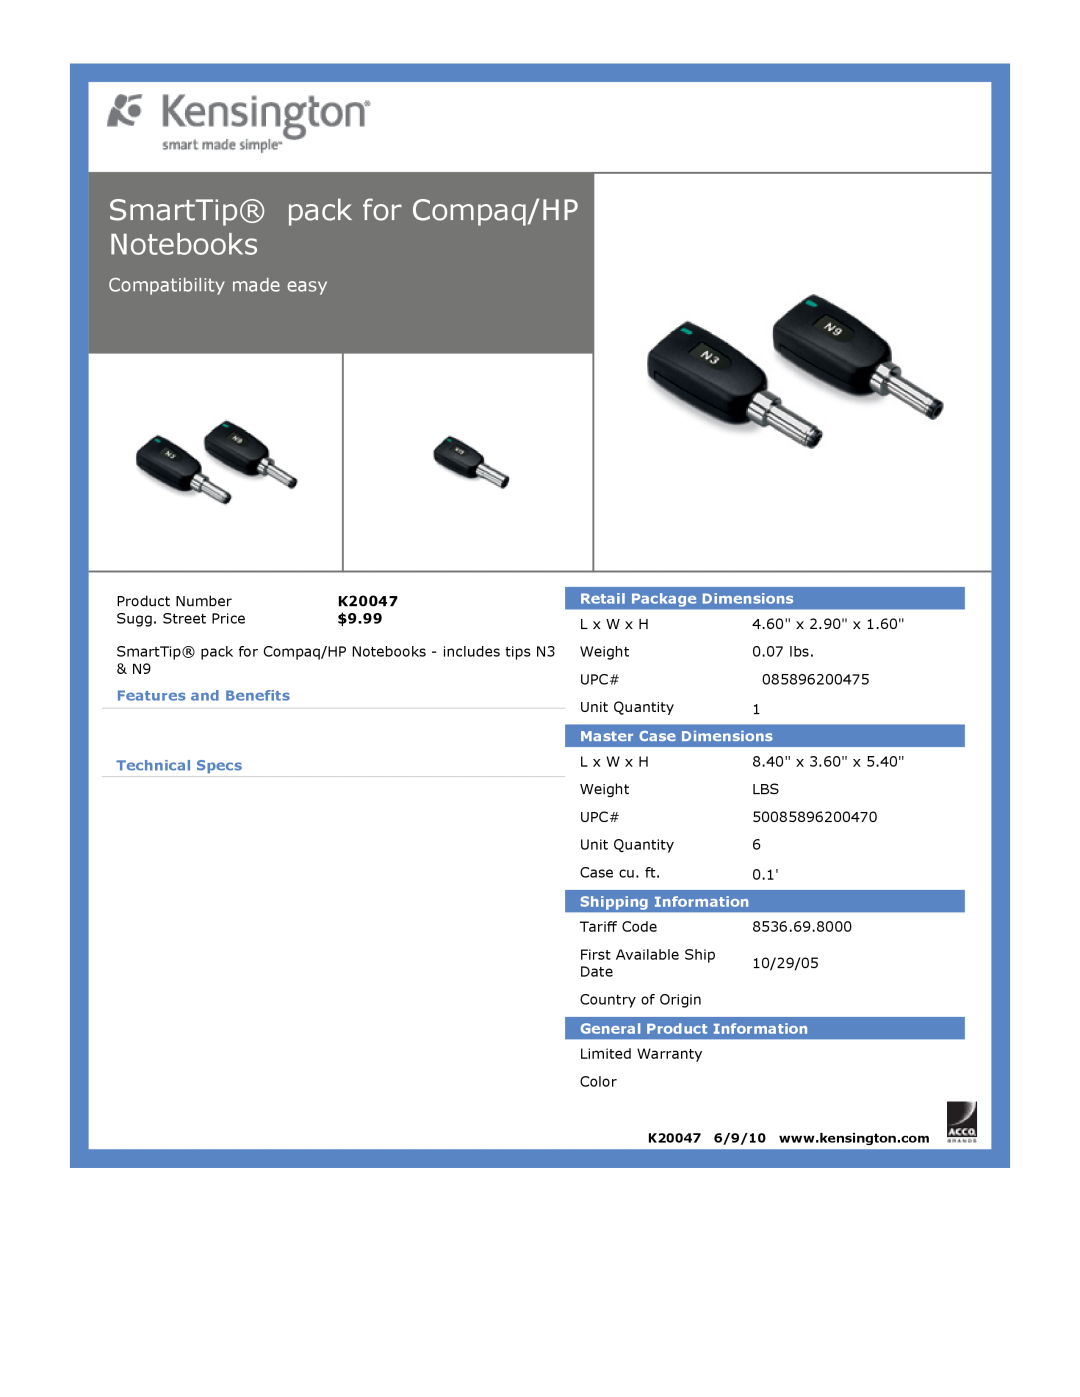 Kensington EU64325 SmartTip pack for Compaq/HP Notebooks, Compatibility made easy, $9.99, Retail Package Dimensions 